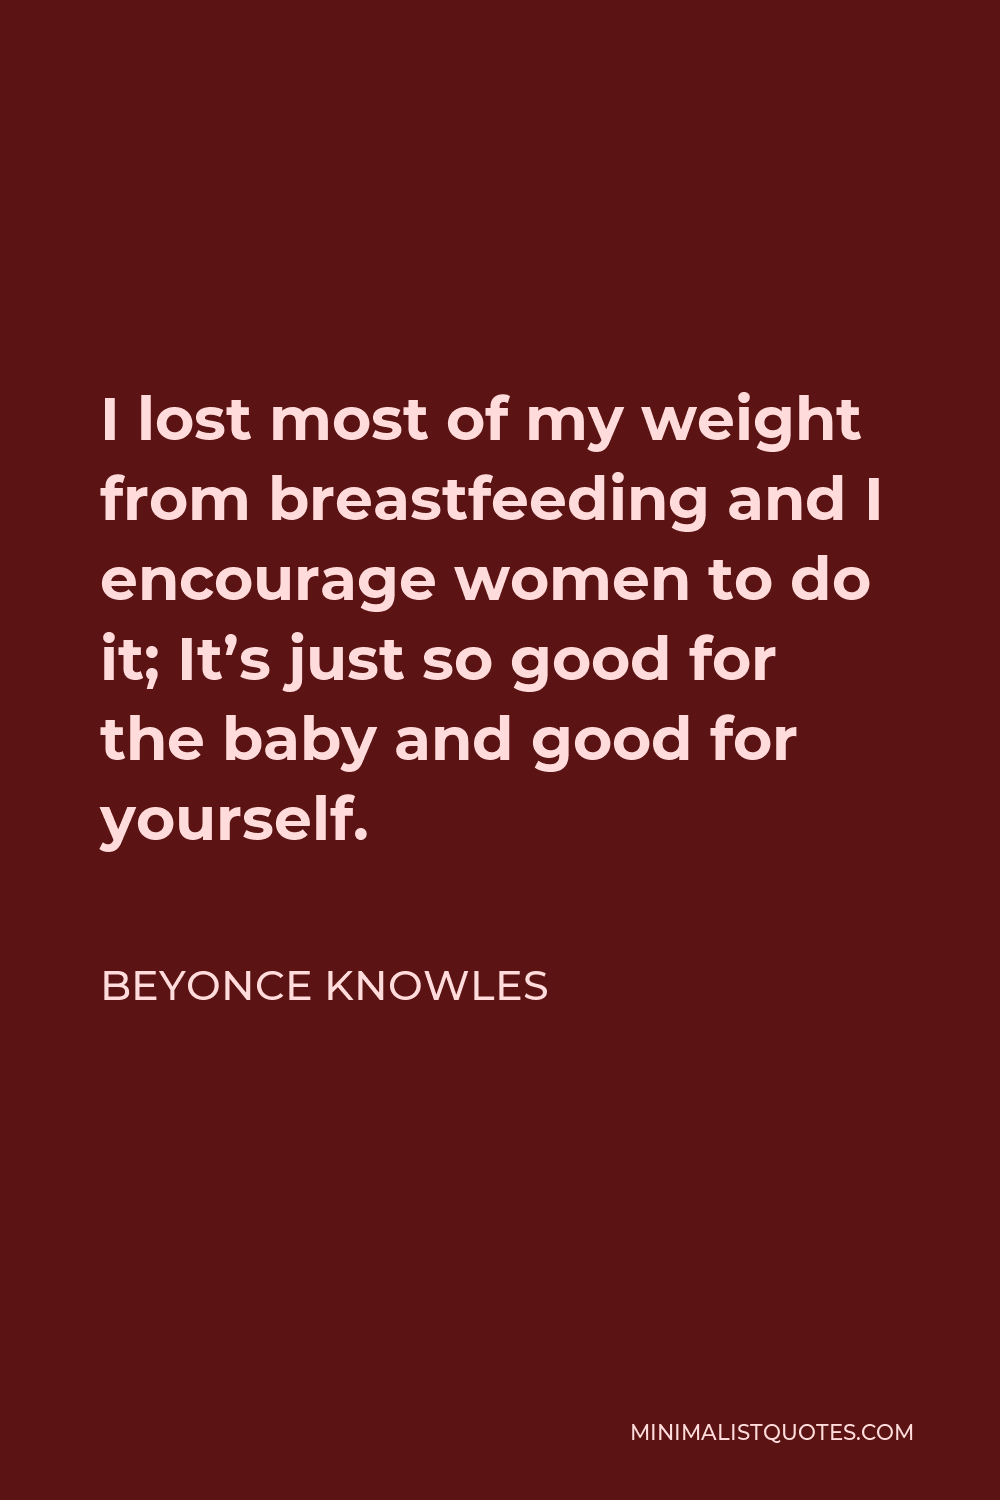 Beyonce Knowles Quote - I lost most of my weight from breastfeeding and I encourage women to do it; It’s just so good for the baby and good for yourself.